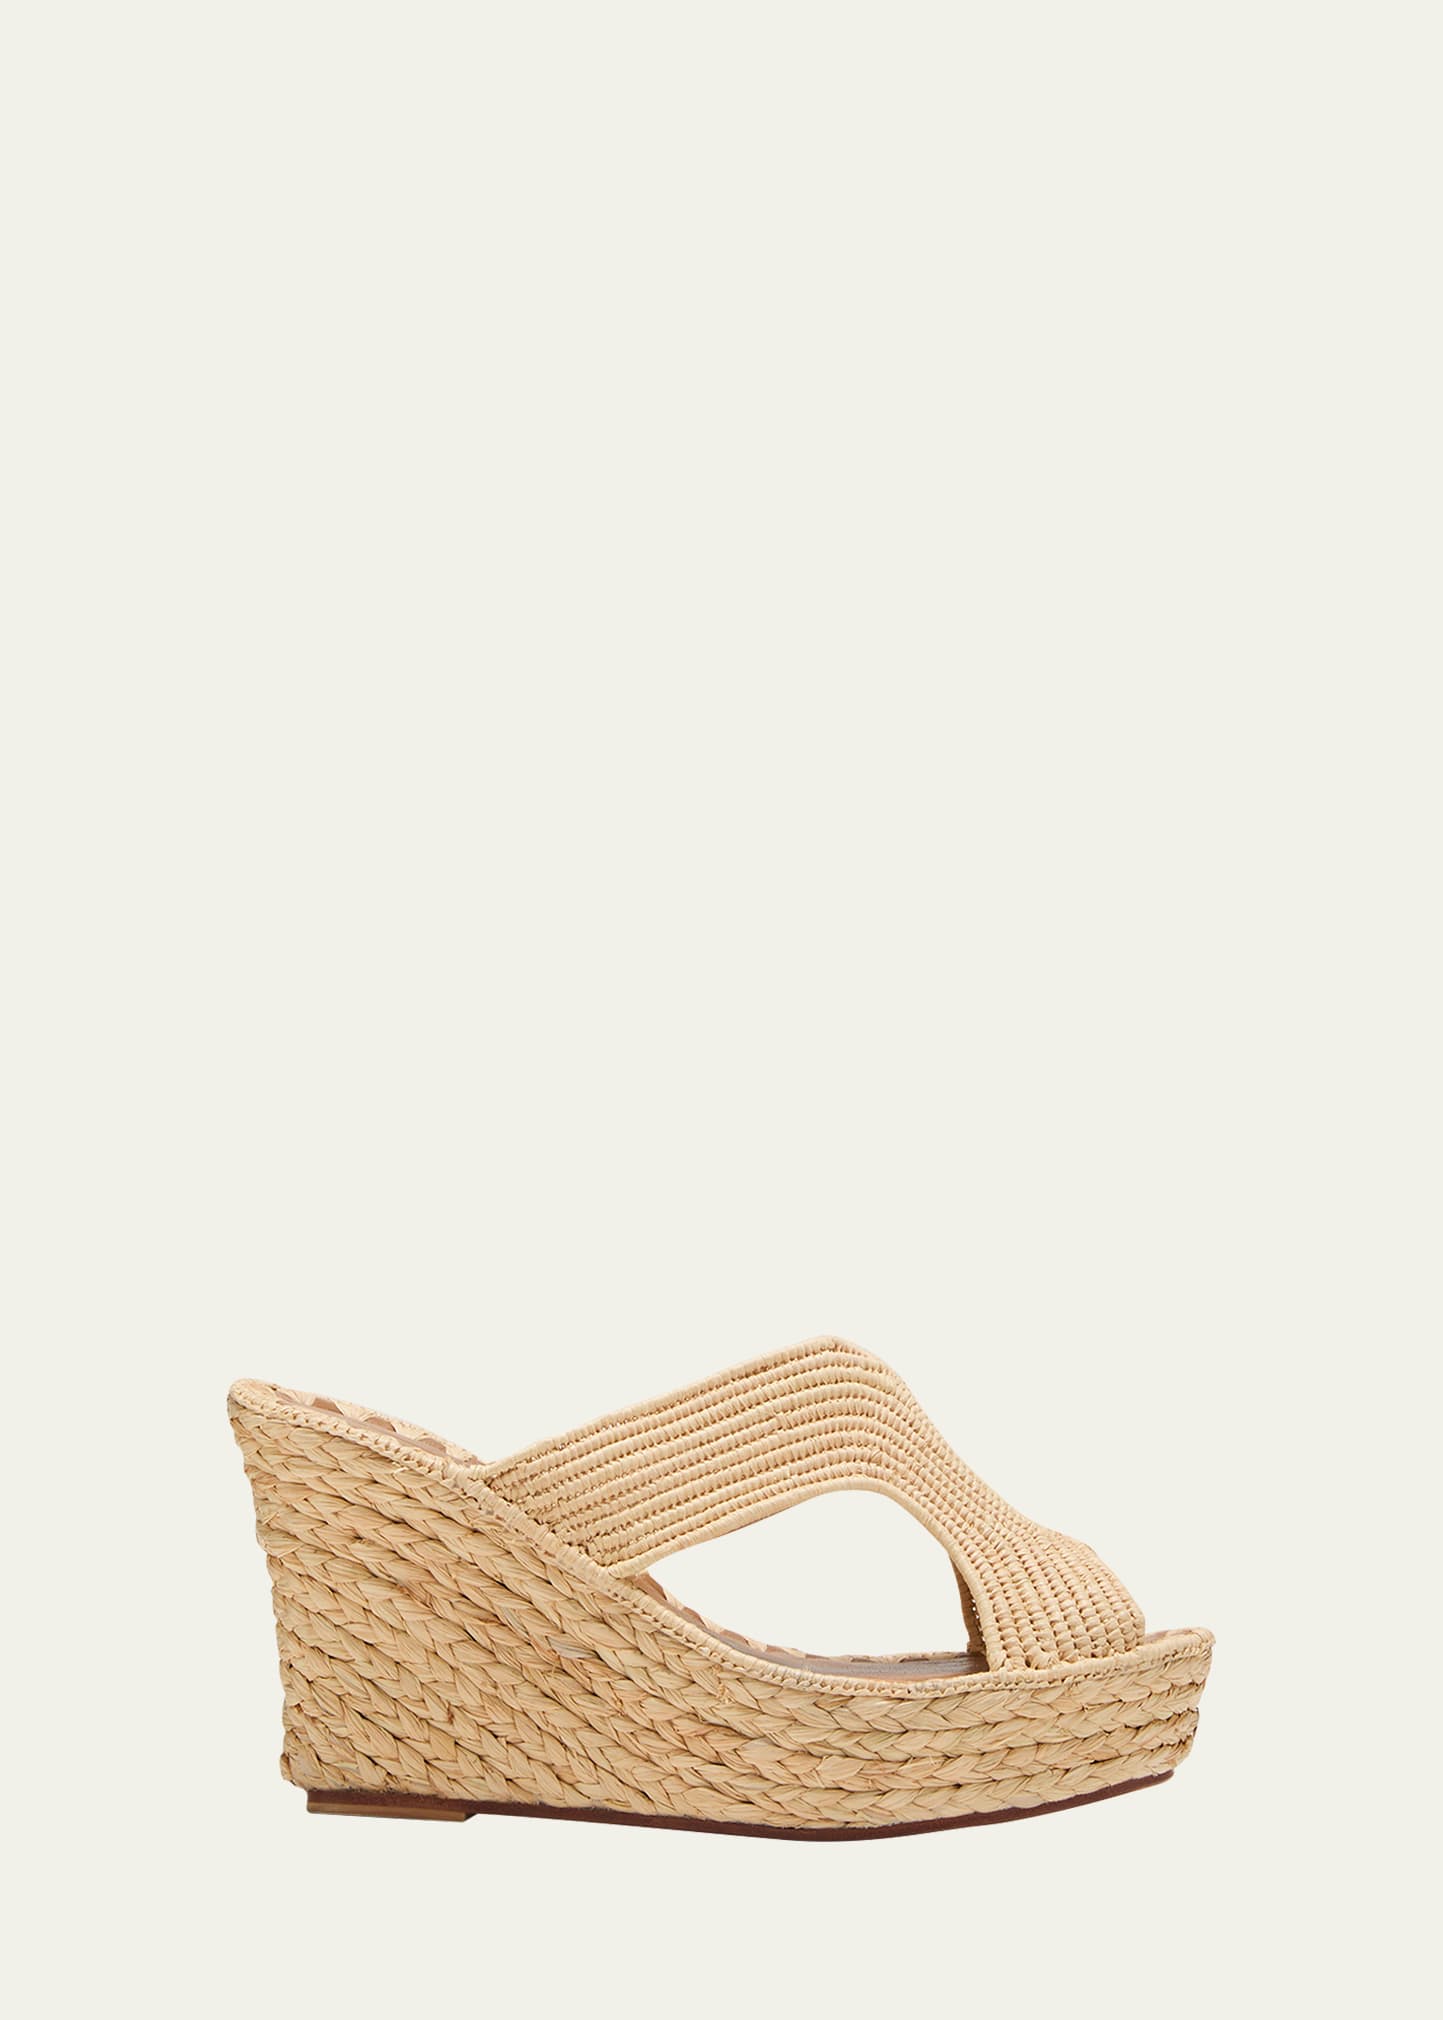 Carrie Forbes Lina Cutout Slide Wedge Sandals